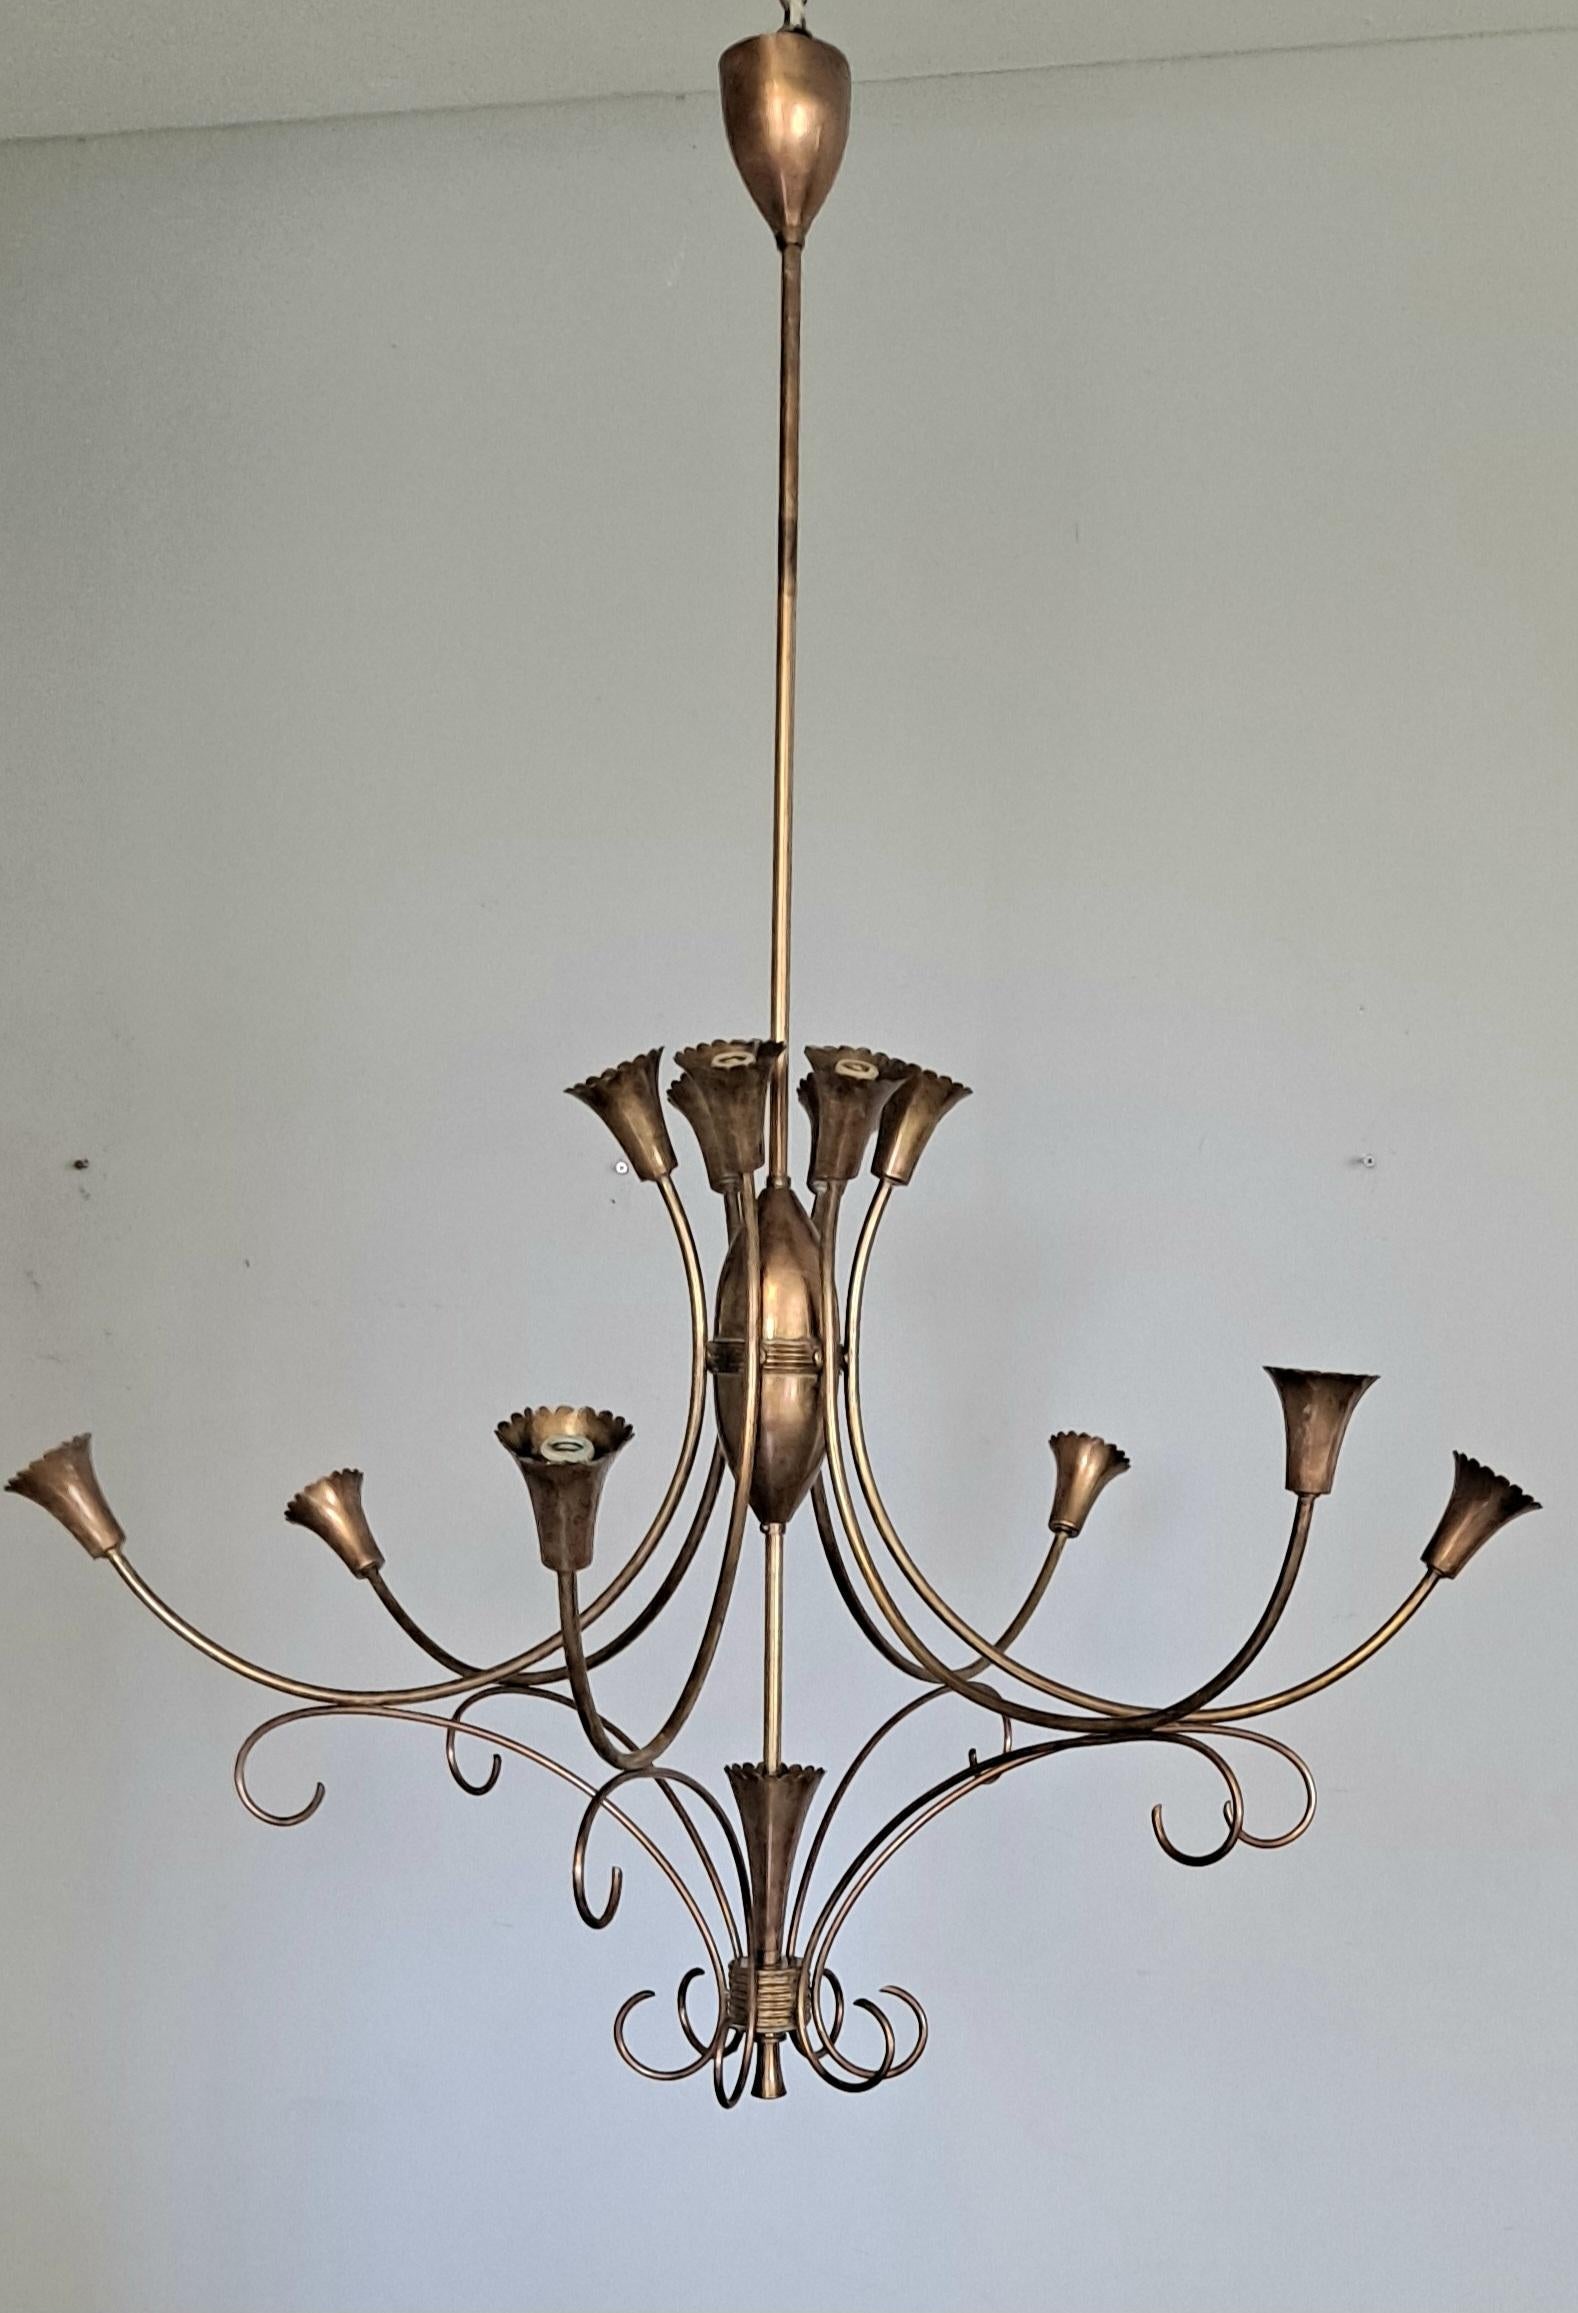  Italian chandelier from 1950 s. Brass base and ceramic -brass  sockets.
Romantic and beautiful Italian design chandelier . The upper part can be dismantled and putted back together easy . The USA Continental shipping standard parcel $200 . In home